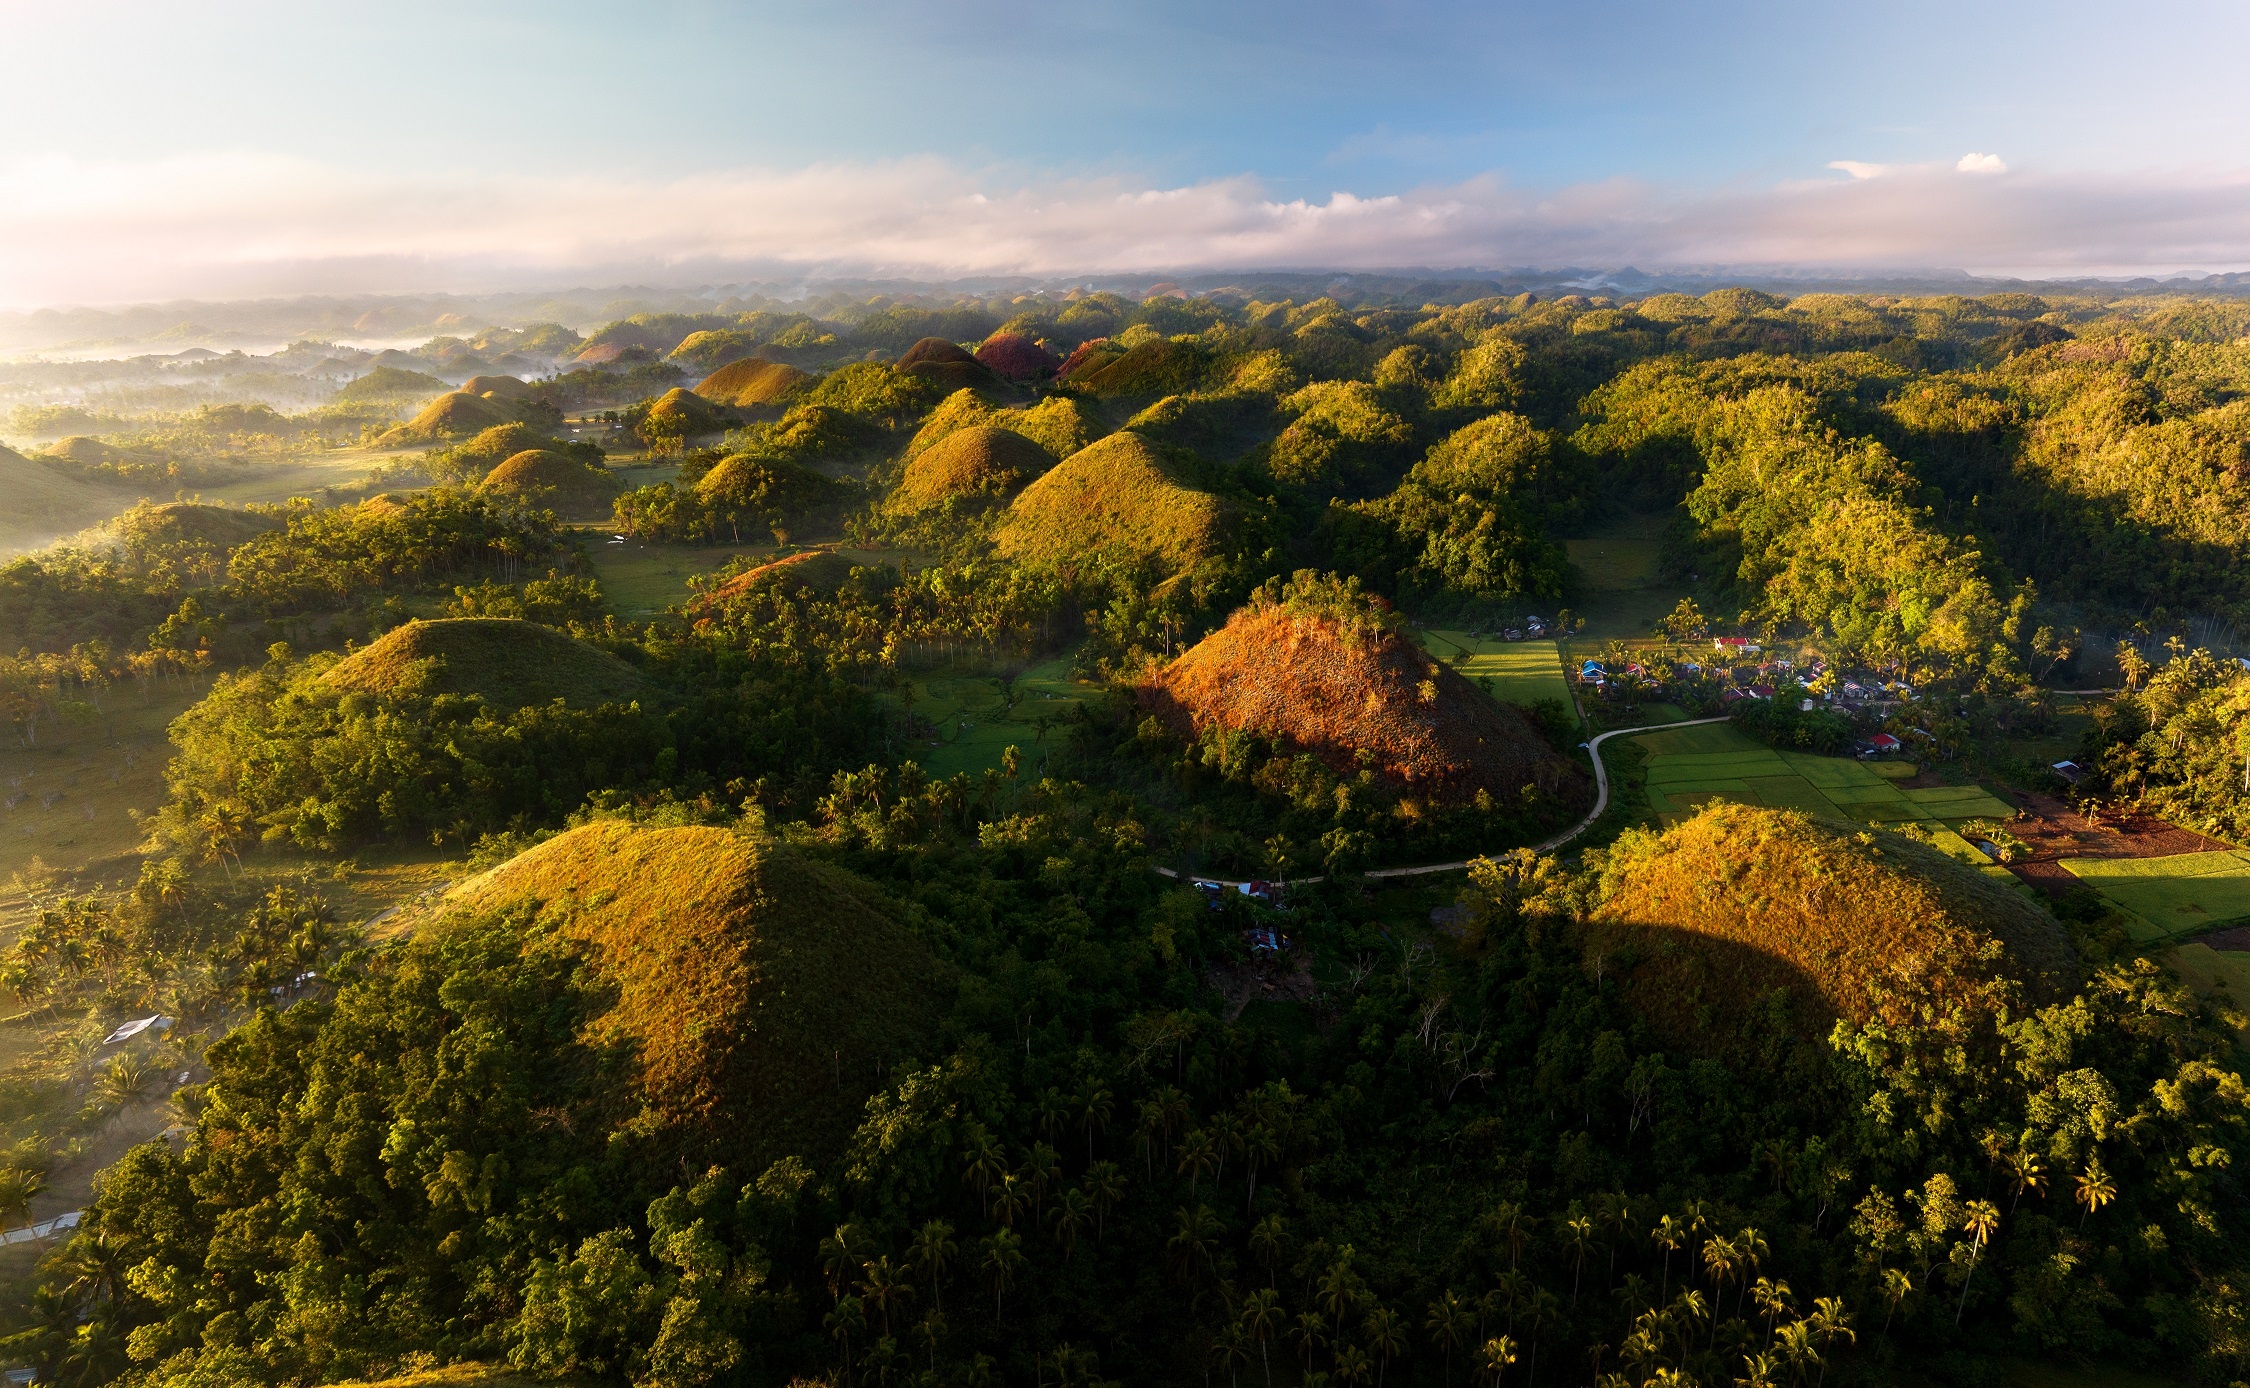 <p>The Chocolate Hills spread across more than 50 square kilometers in Bohol, and island province in the Philippines. No one knows exactly how many there are, but scientists have counted <strong>at least 1,260 hills</strong> and there could be as many as 1,776.</p>